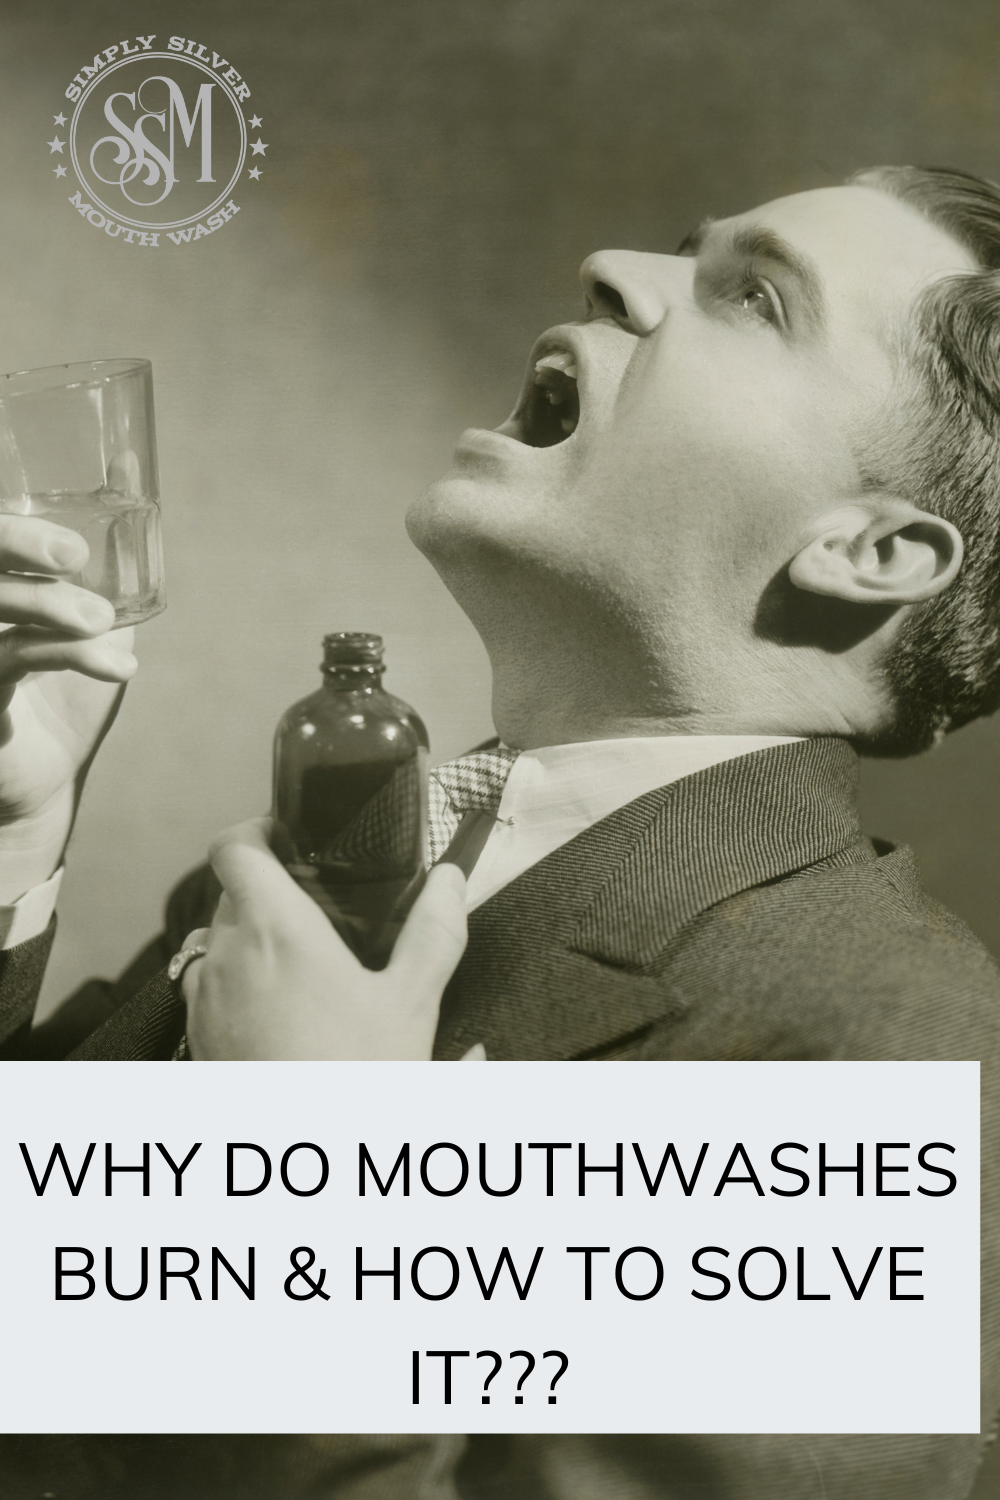 Why do mouthwashes burn and how to solve it